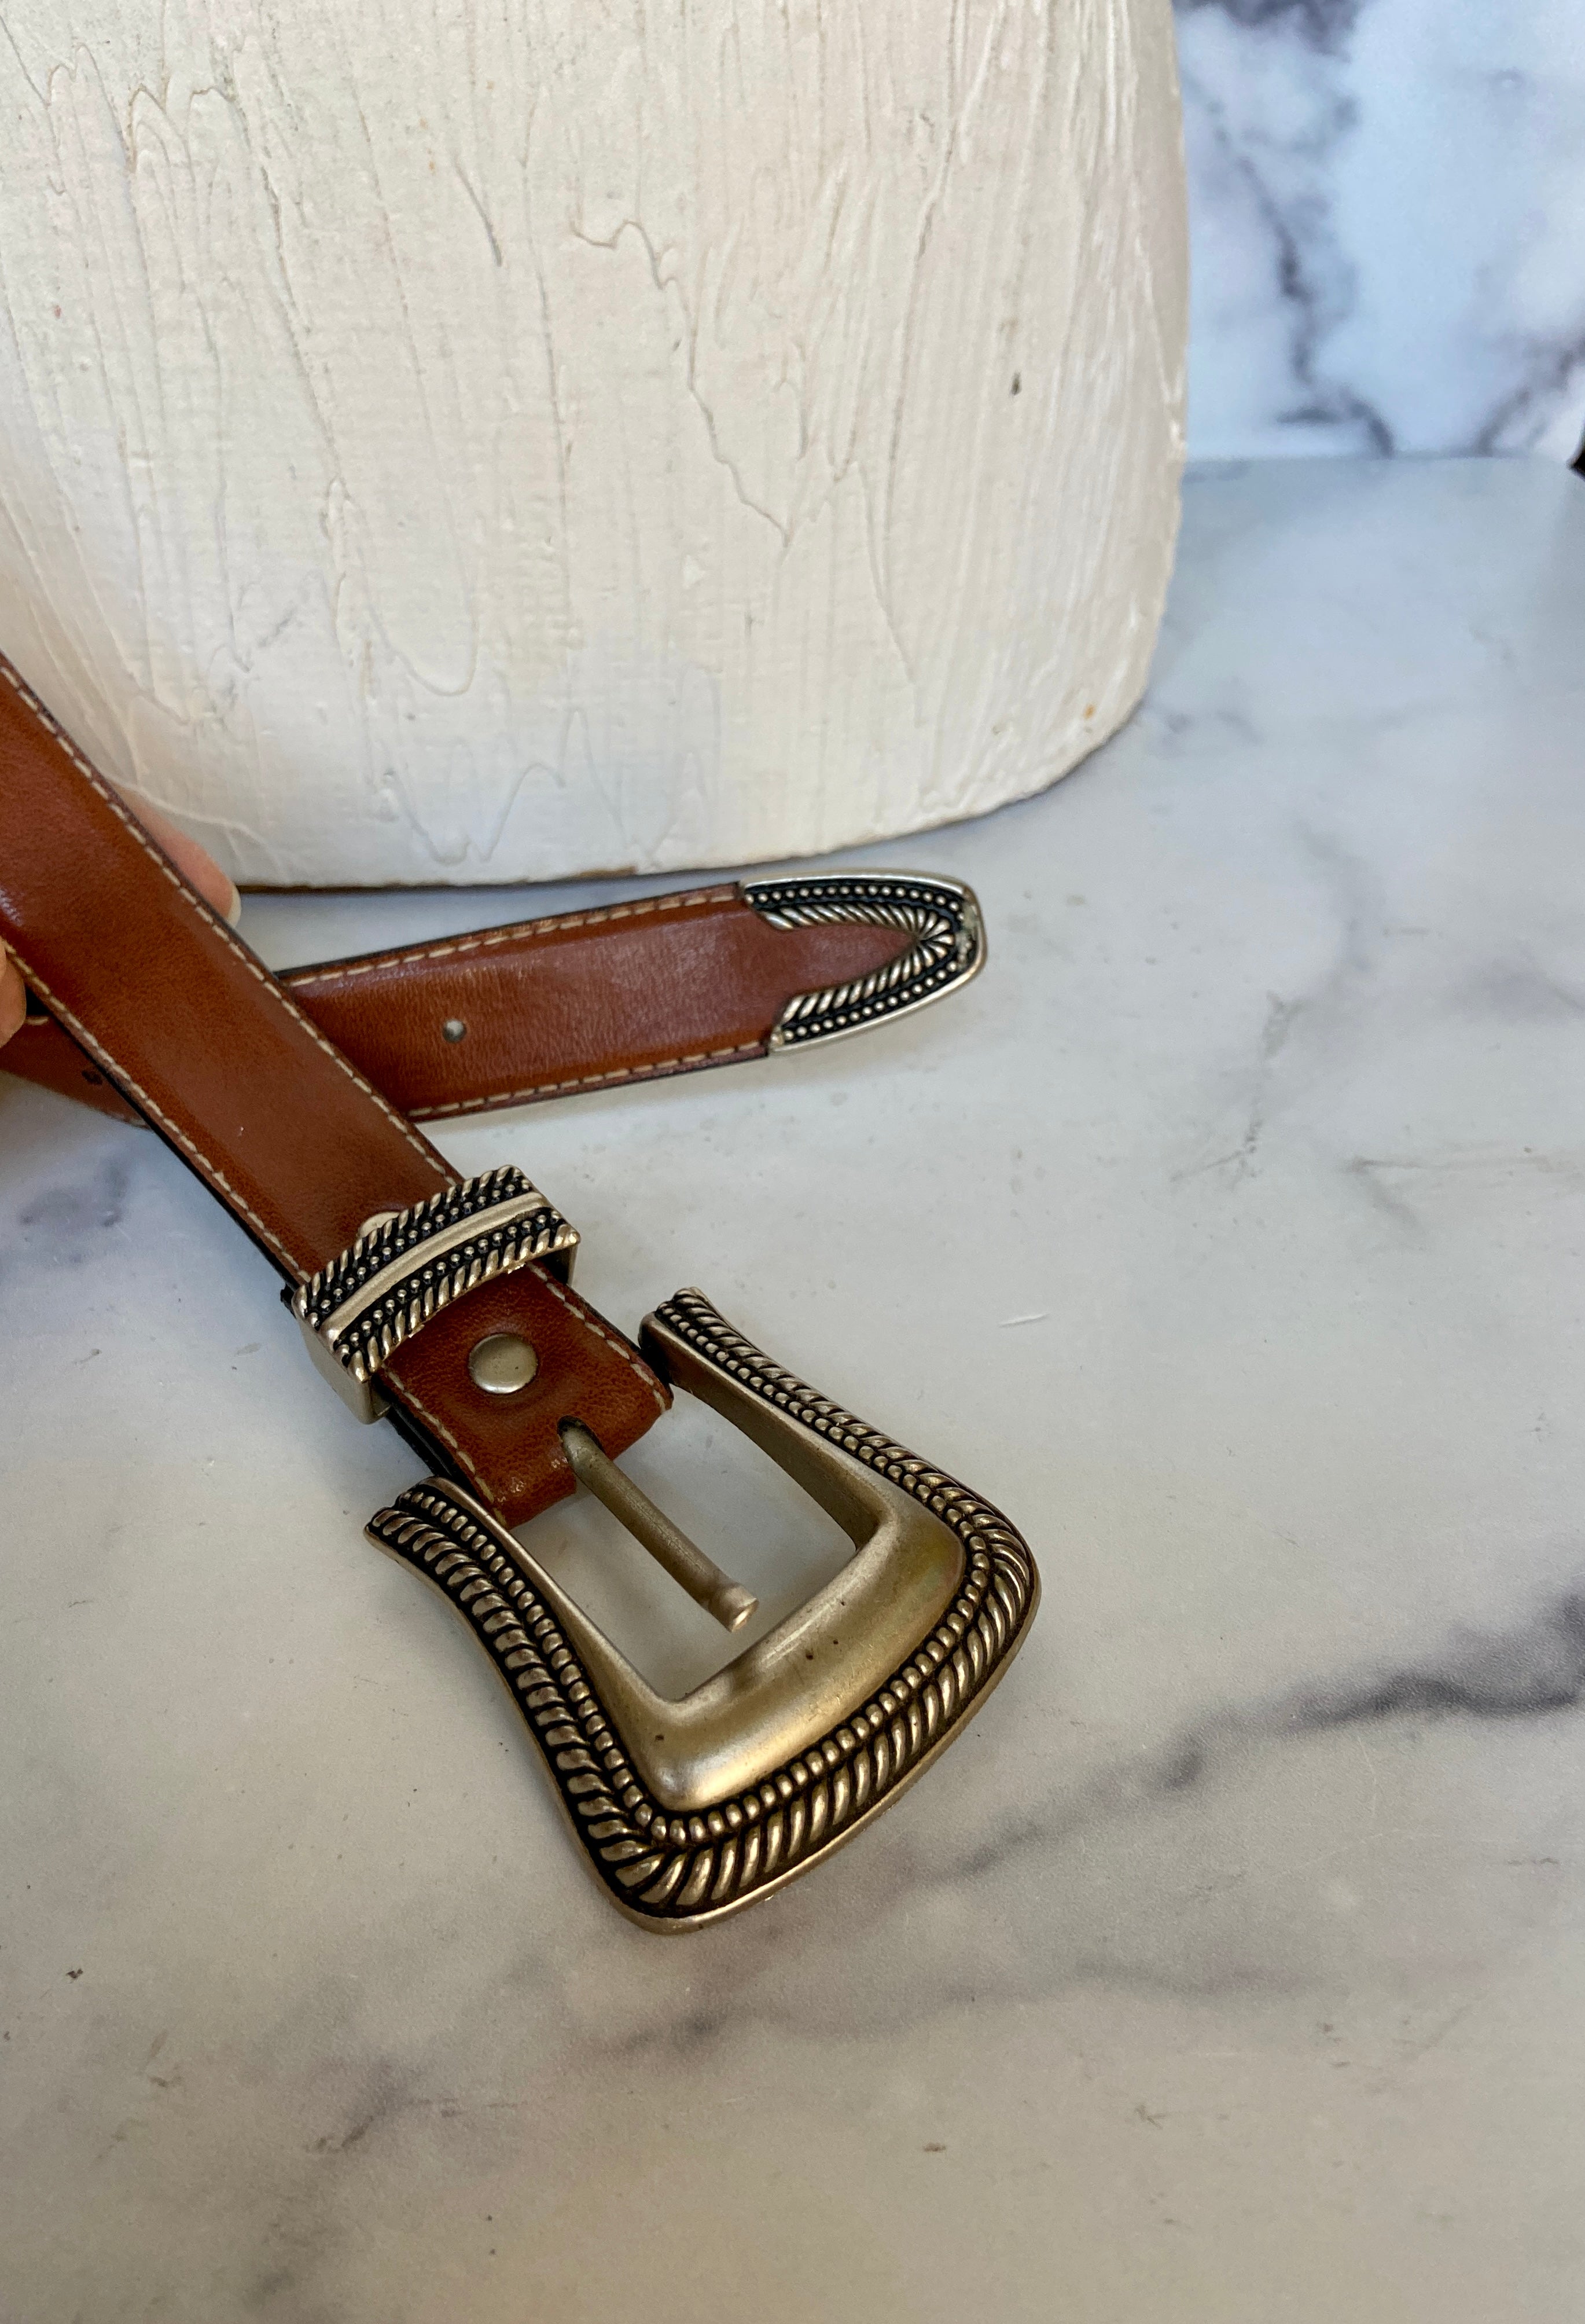 Brown tone leather belt